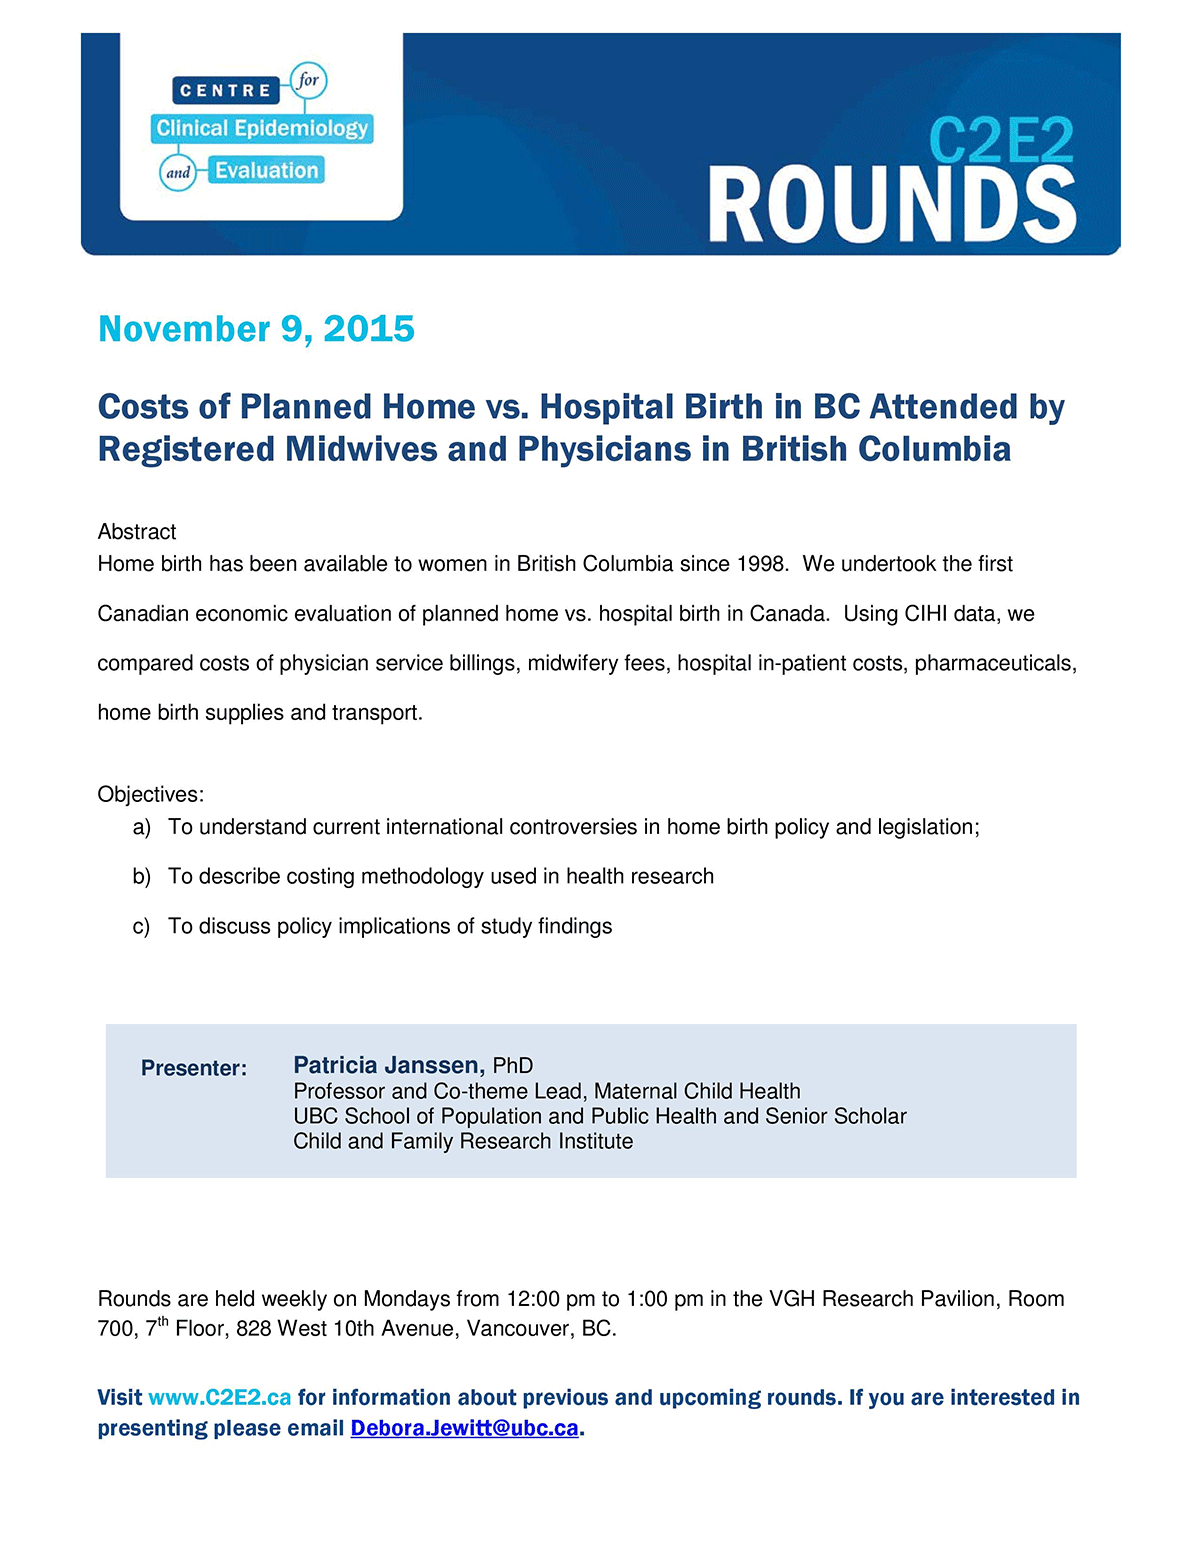 C2E2 Rounds: Costs of Planned Home vs. Hospital Birth in BC Attended by Registered Midwives and Physicians in British Columbia